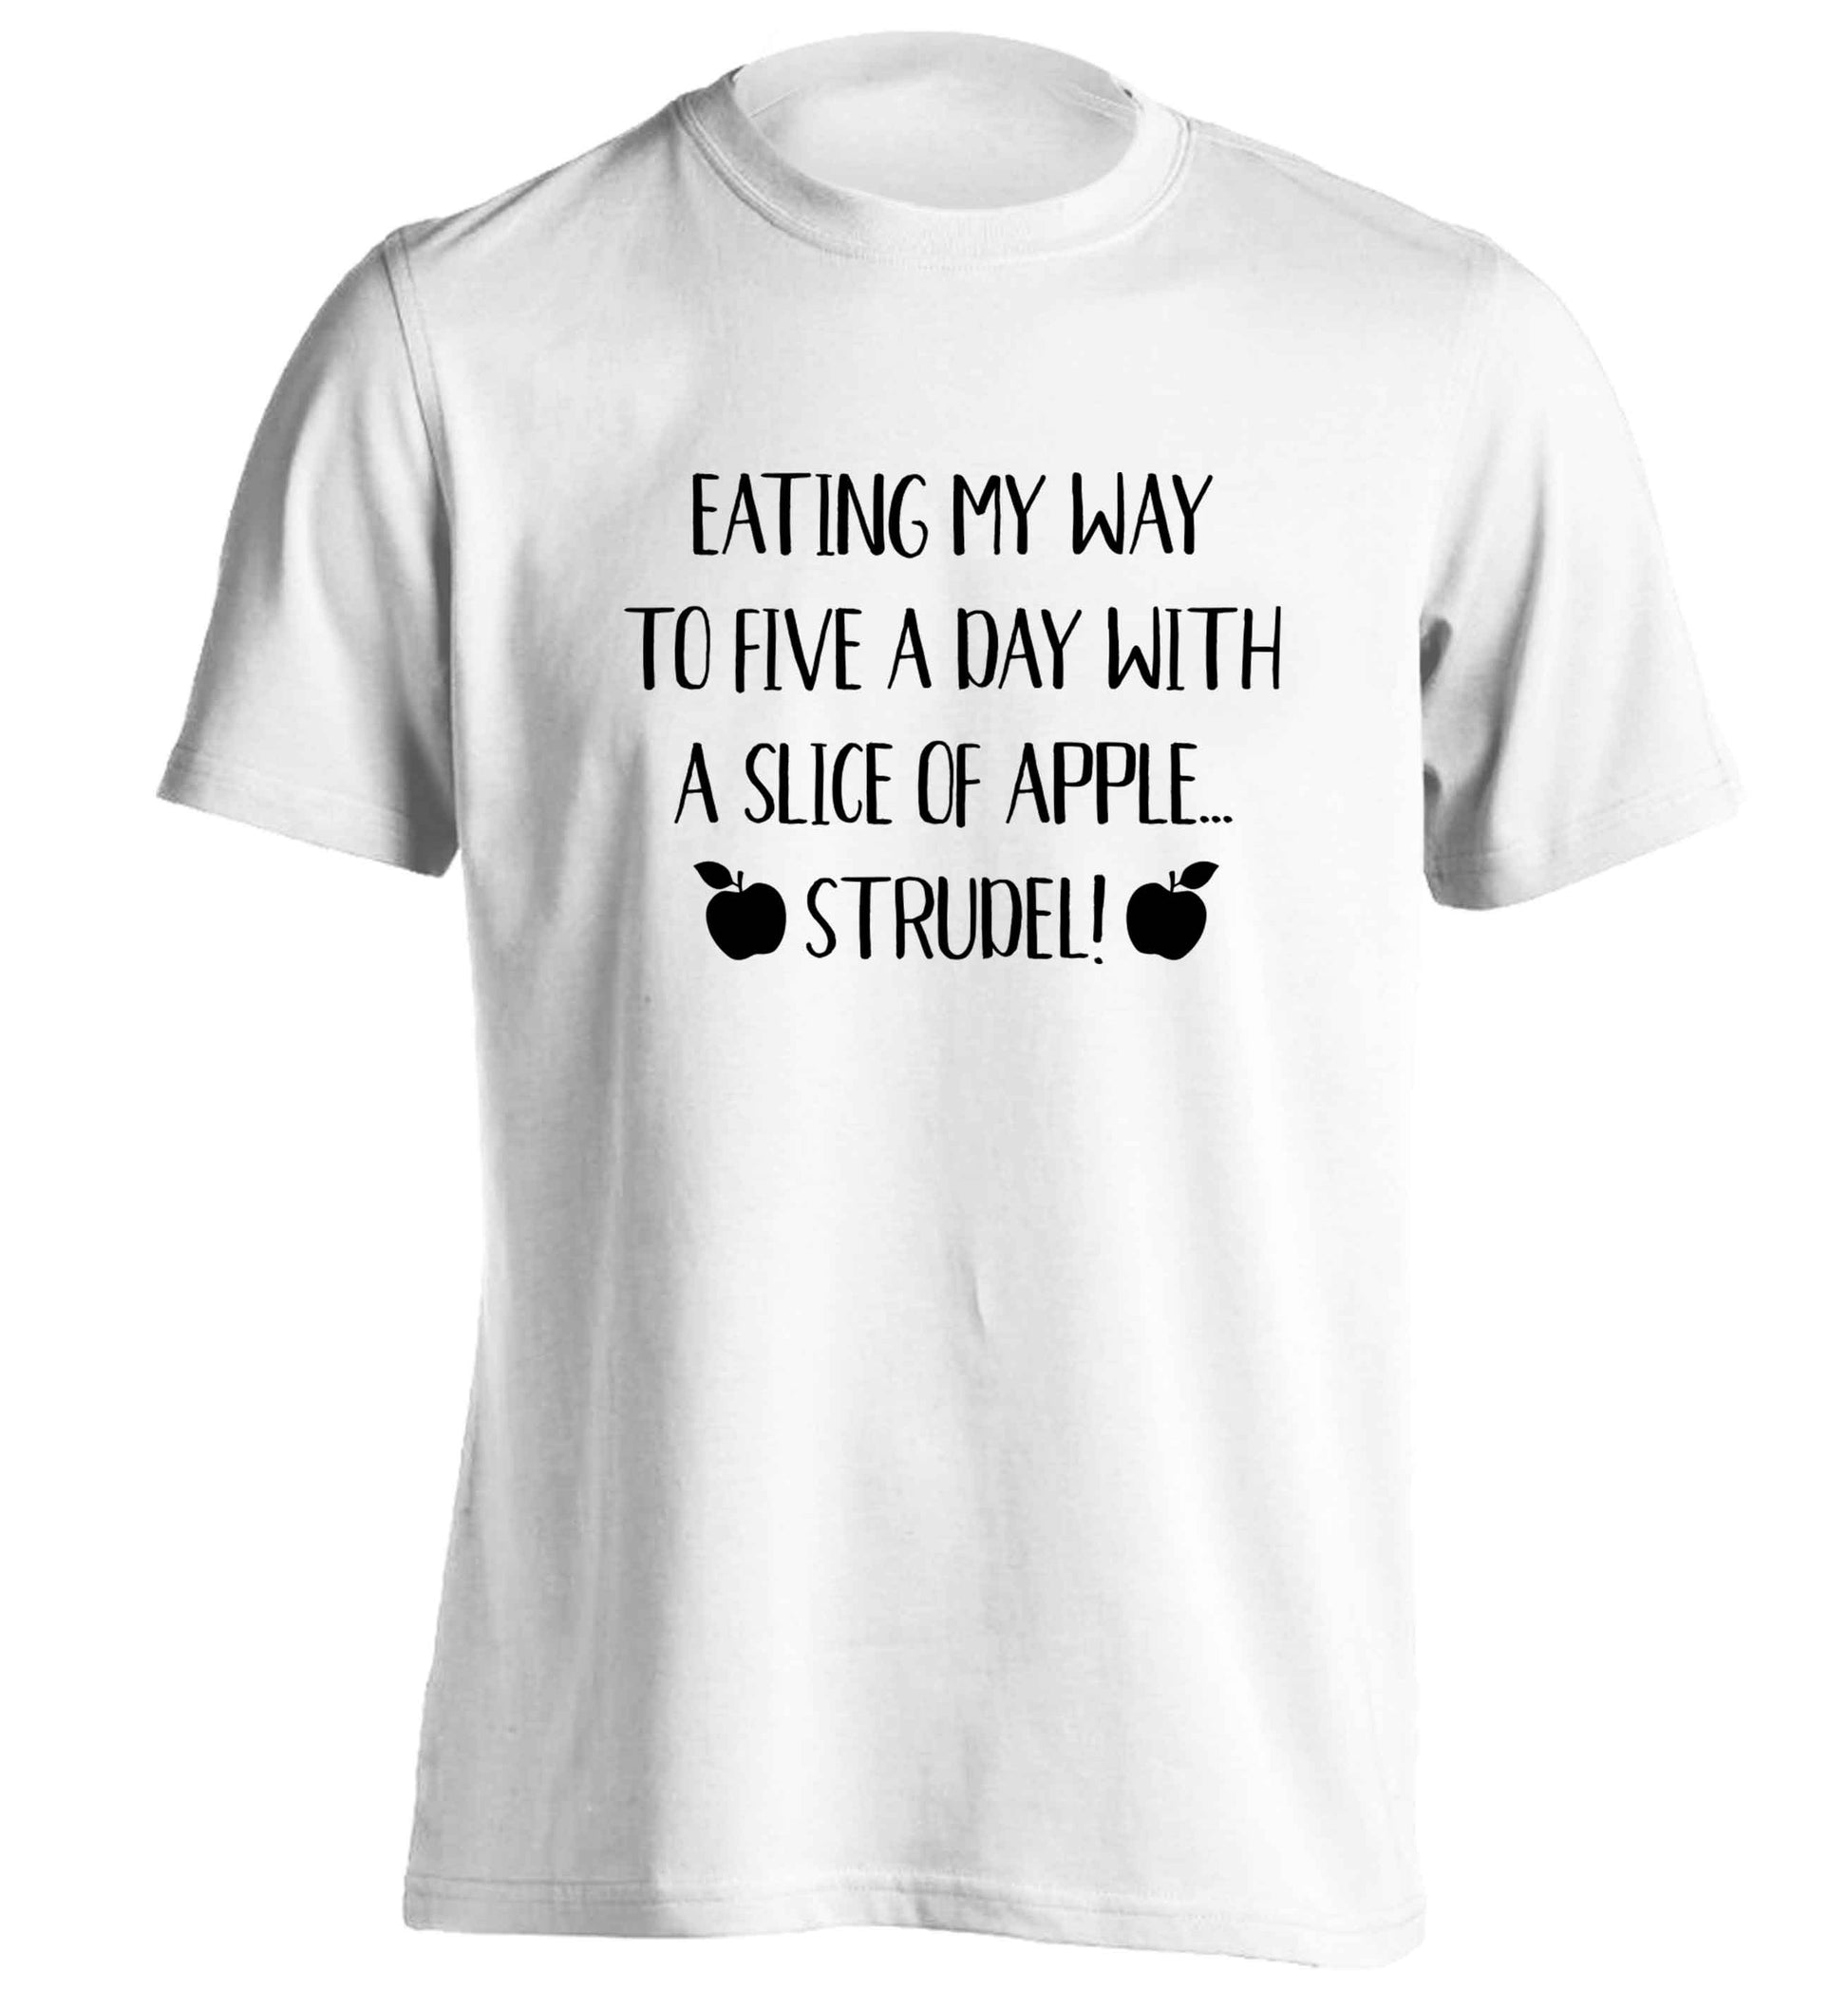 Eating my way to five a day with a slice of apple strudel adults unisex white Tshirt 2XL